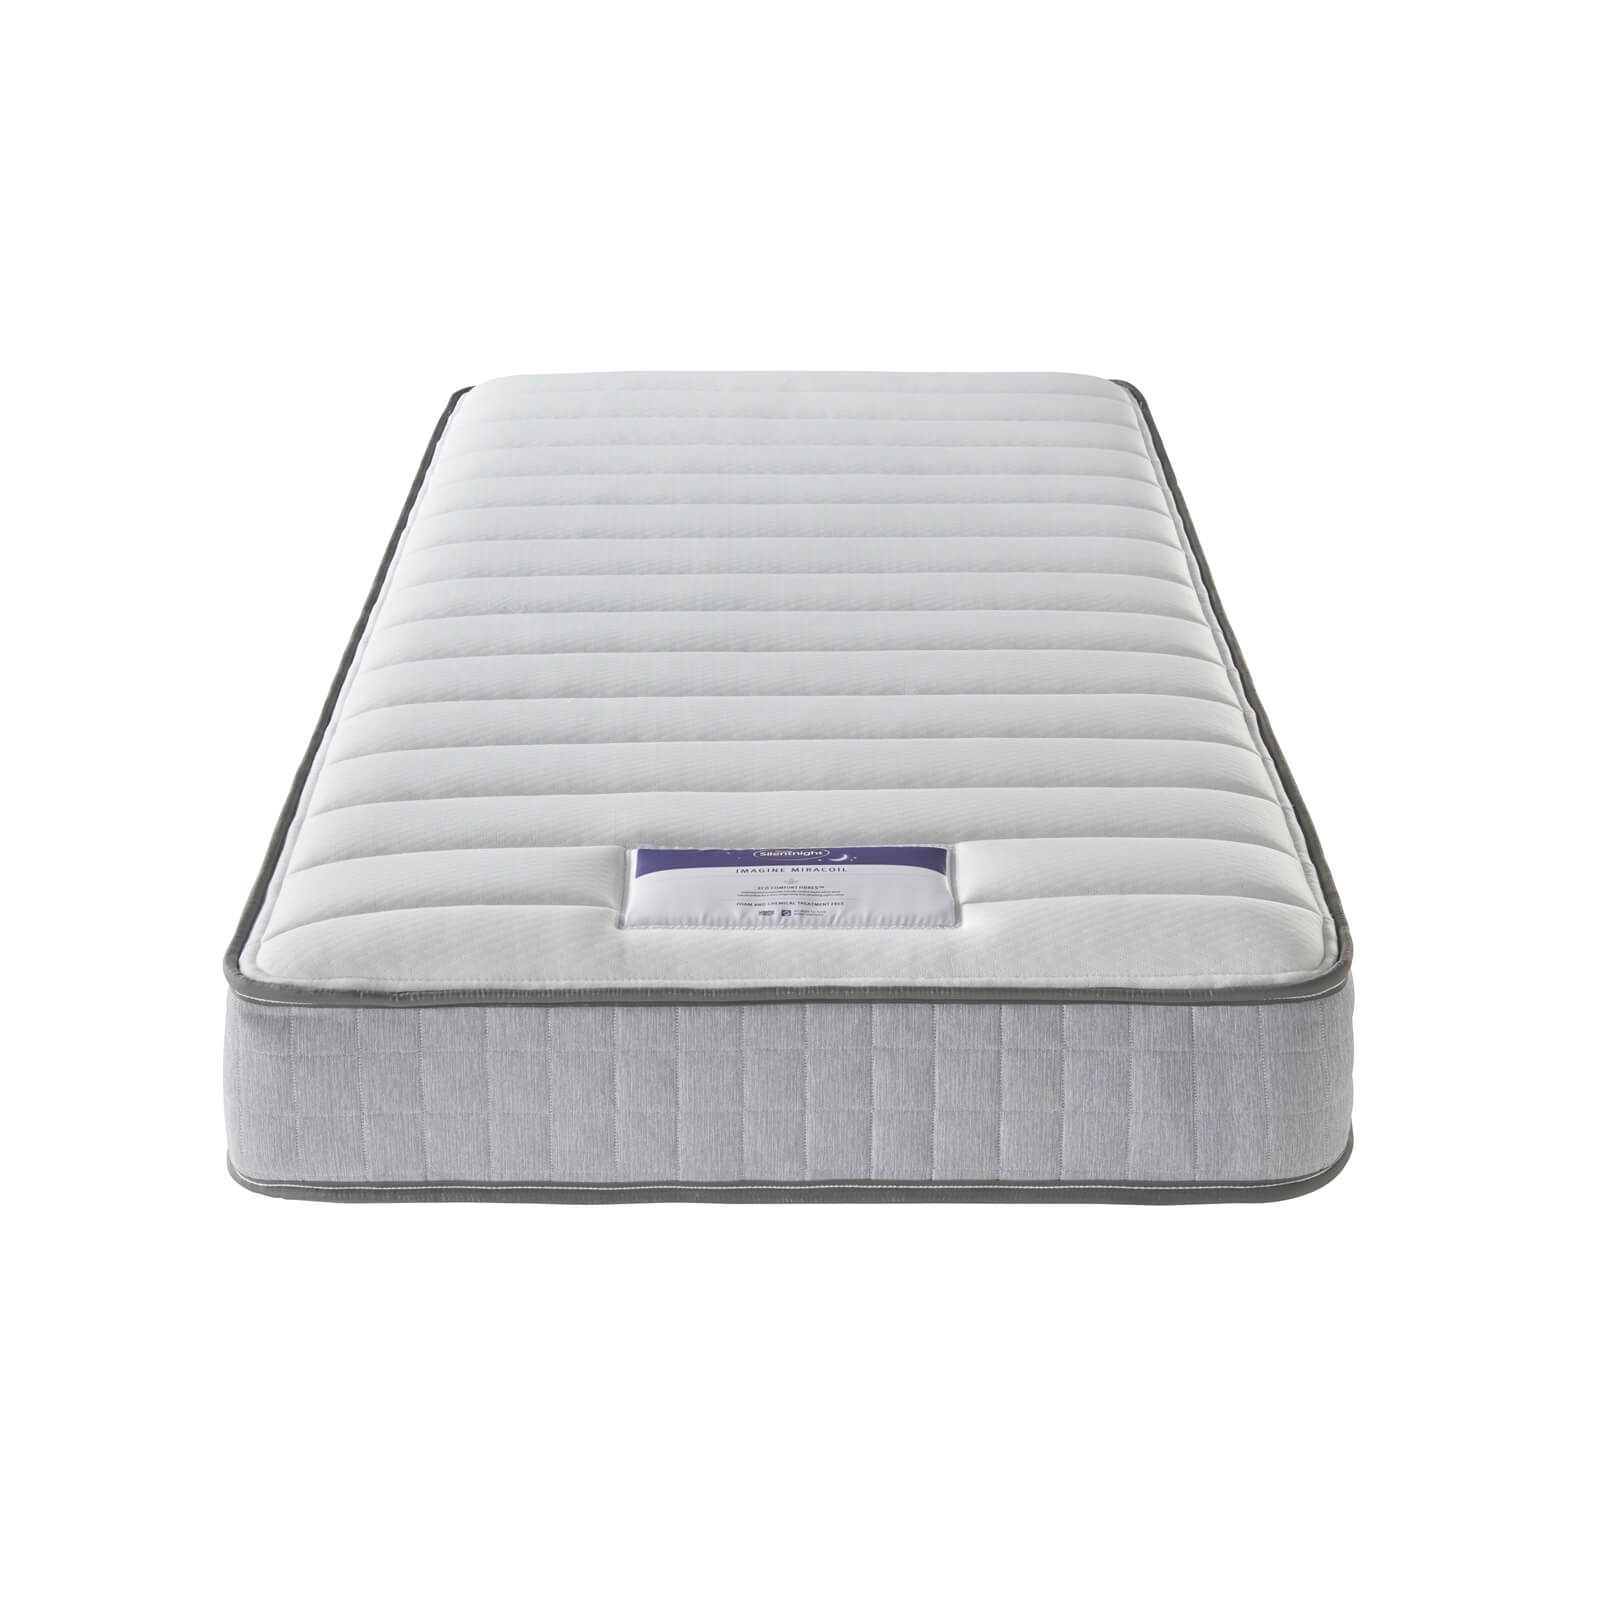 Silentnight Healthy Growth Miracoil Kids Mattress - Small Double